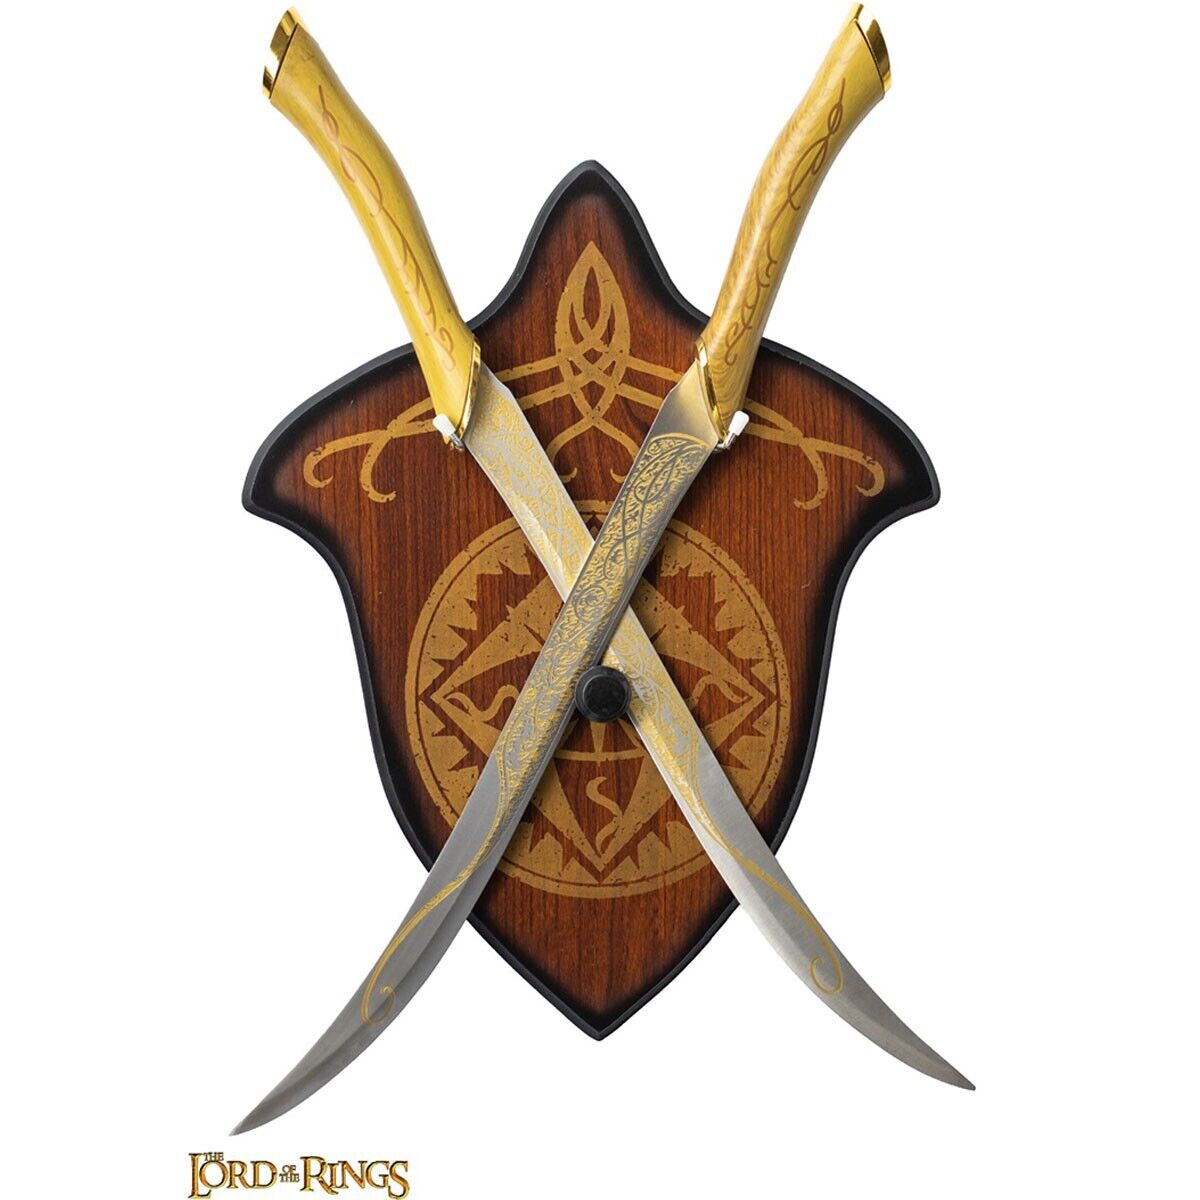 LORD OF THE RINGS - LEGOLAS GREENLEAF'S ELVEN DUAL SWORDS (w FREE wall plaque)